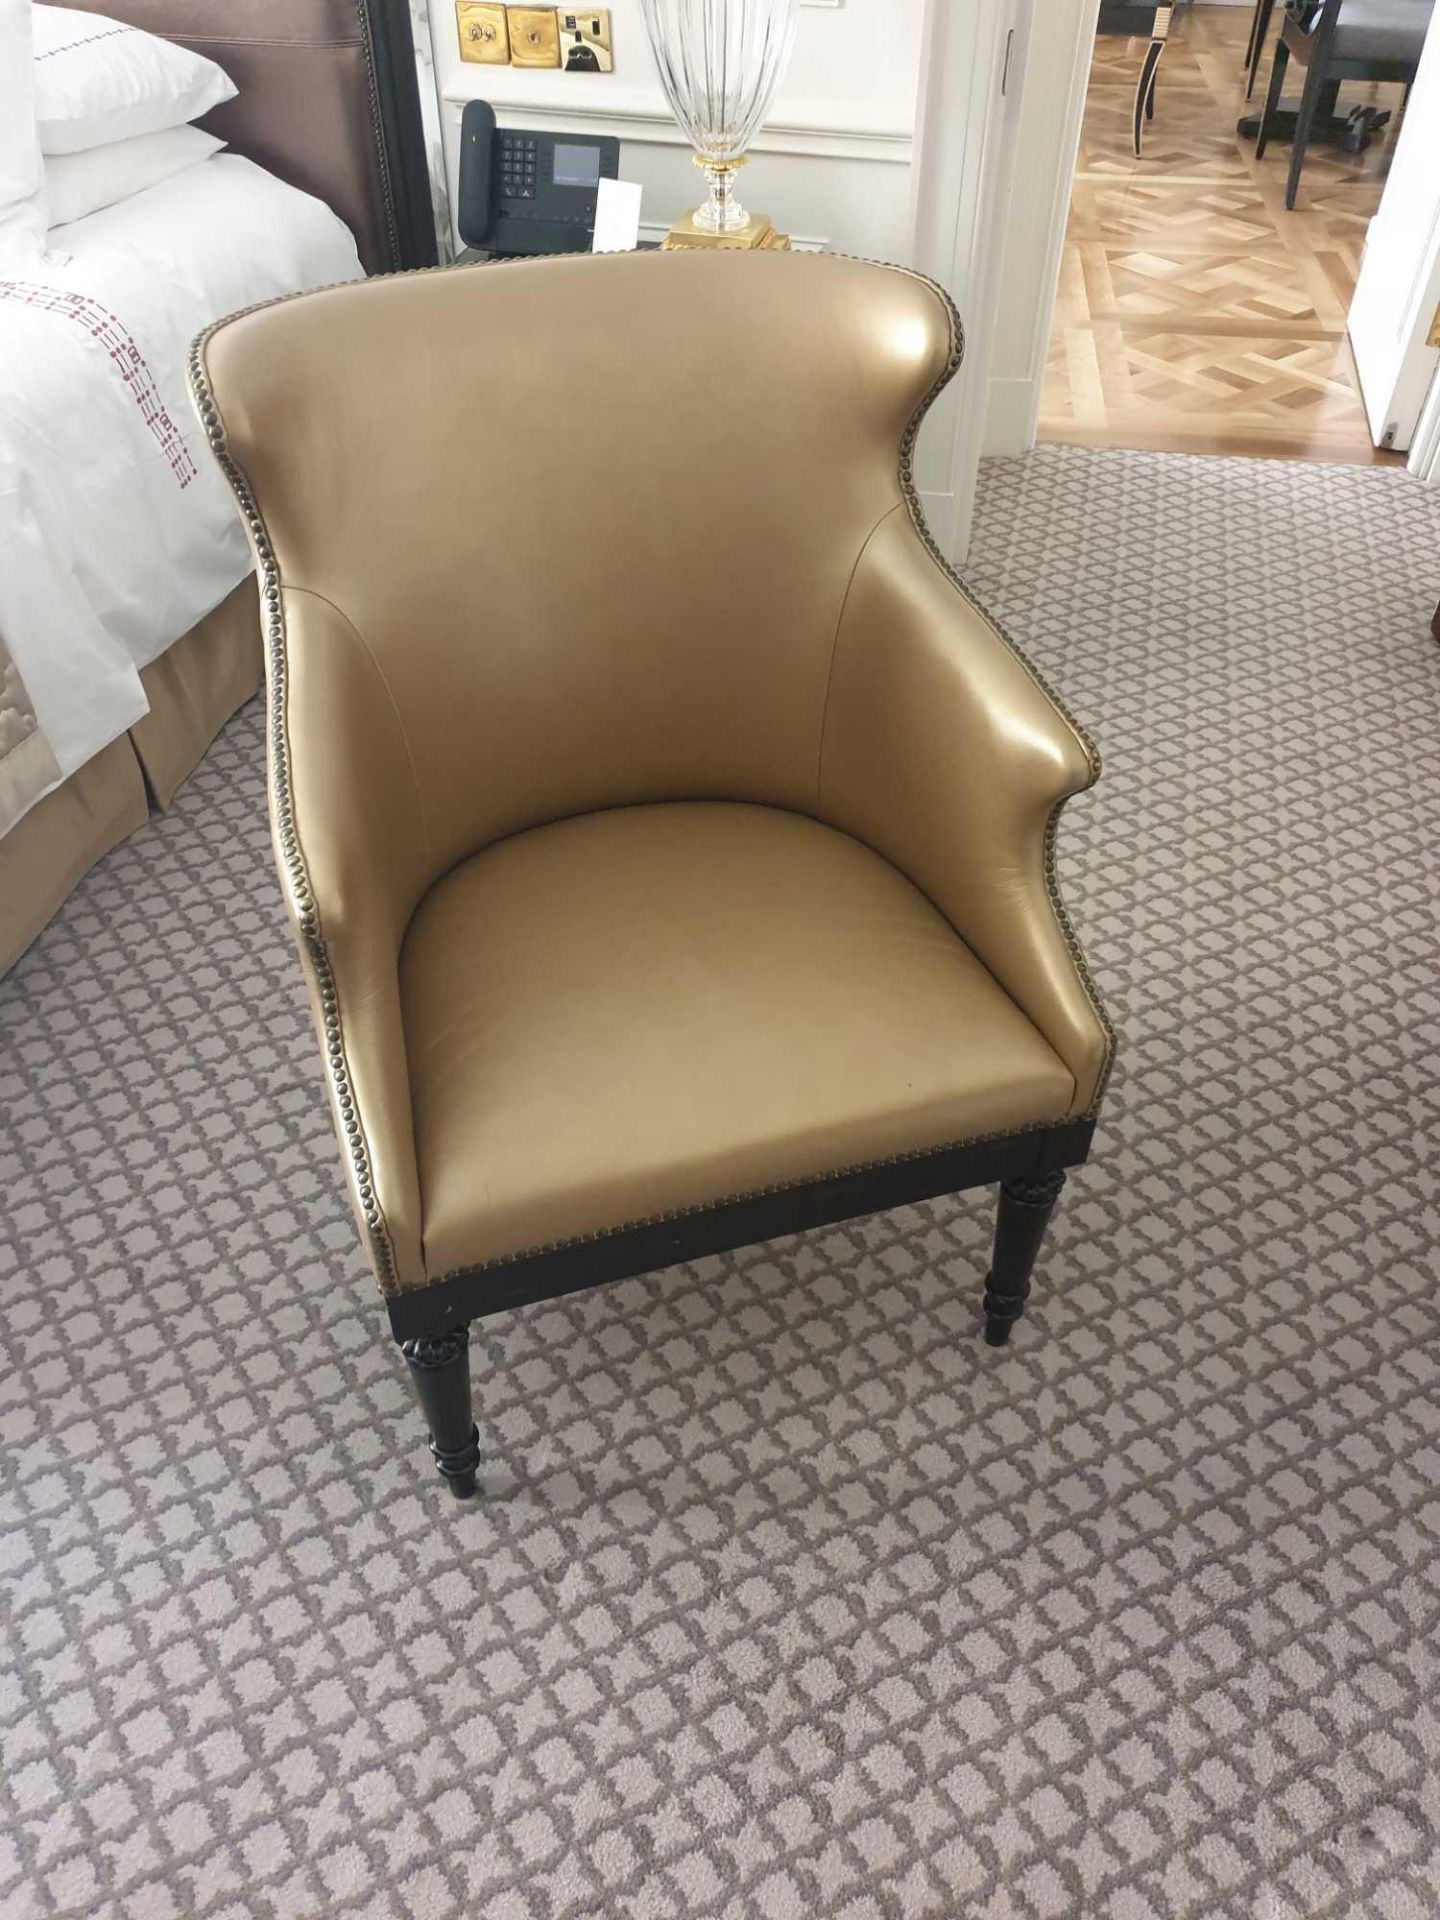 A Modern Wing Back Accent Chair Upholstered In Gold Leather With Pin Stud Detail On Dark Solid